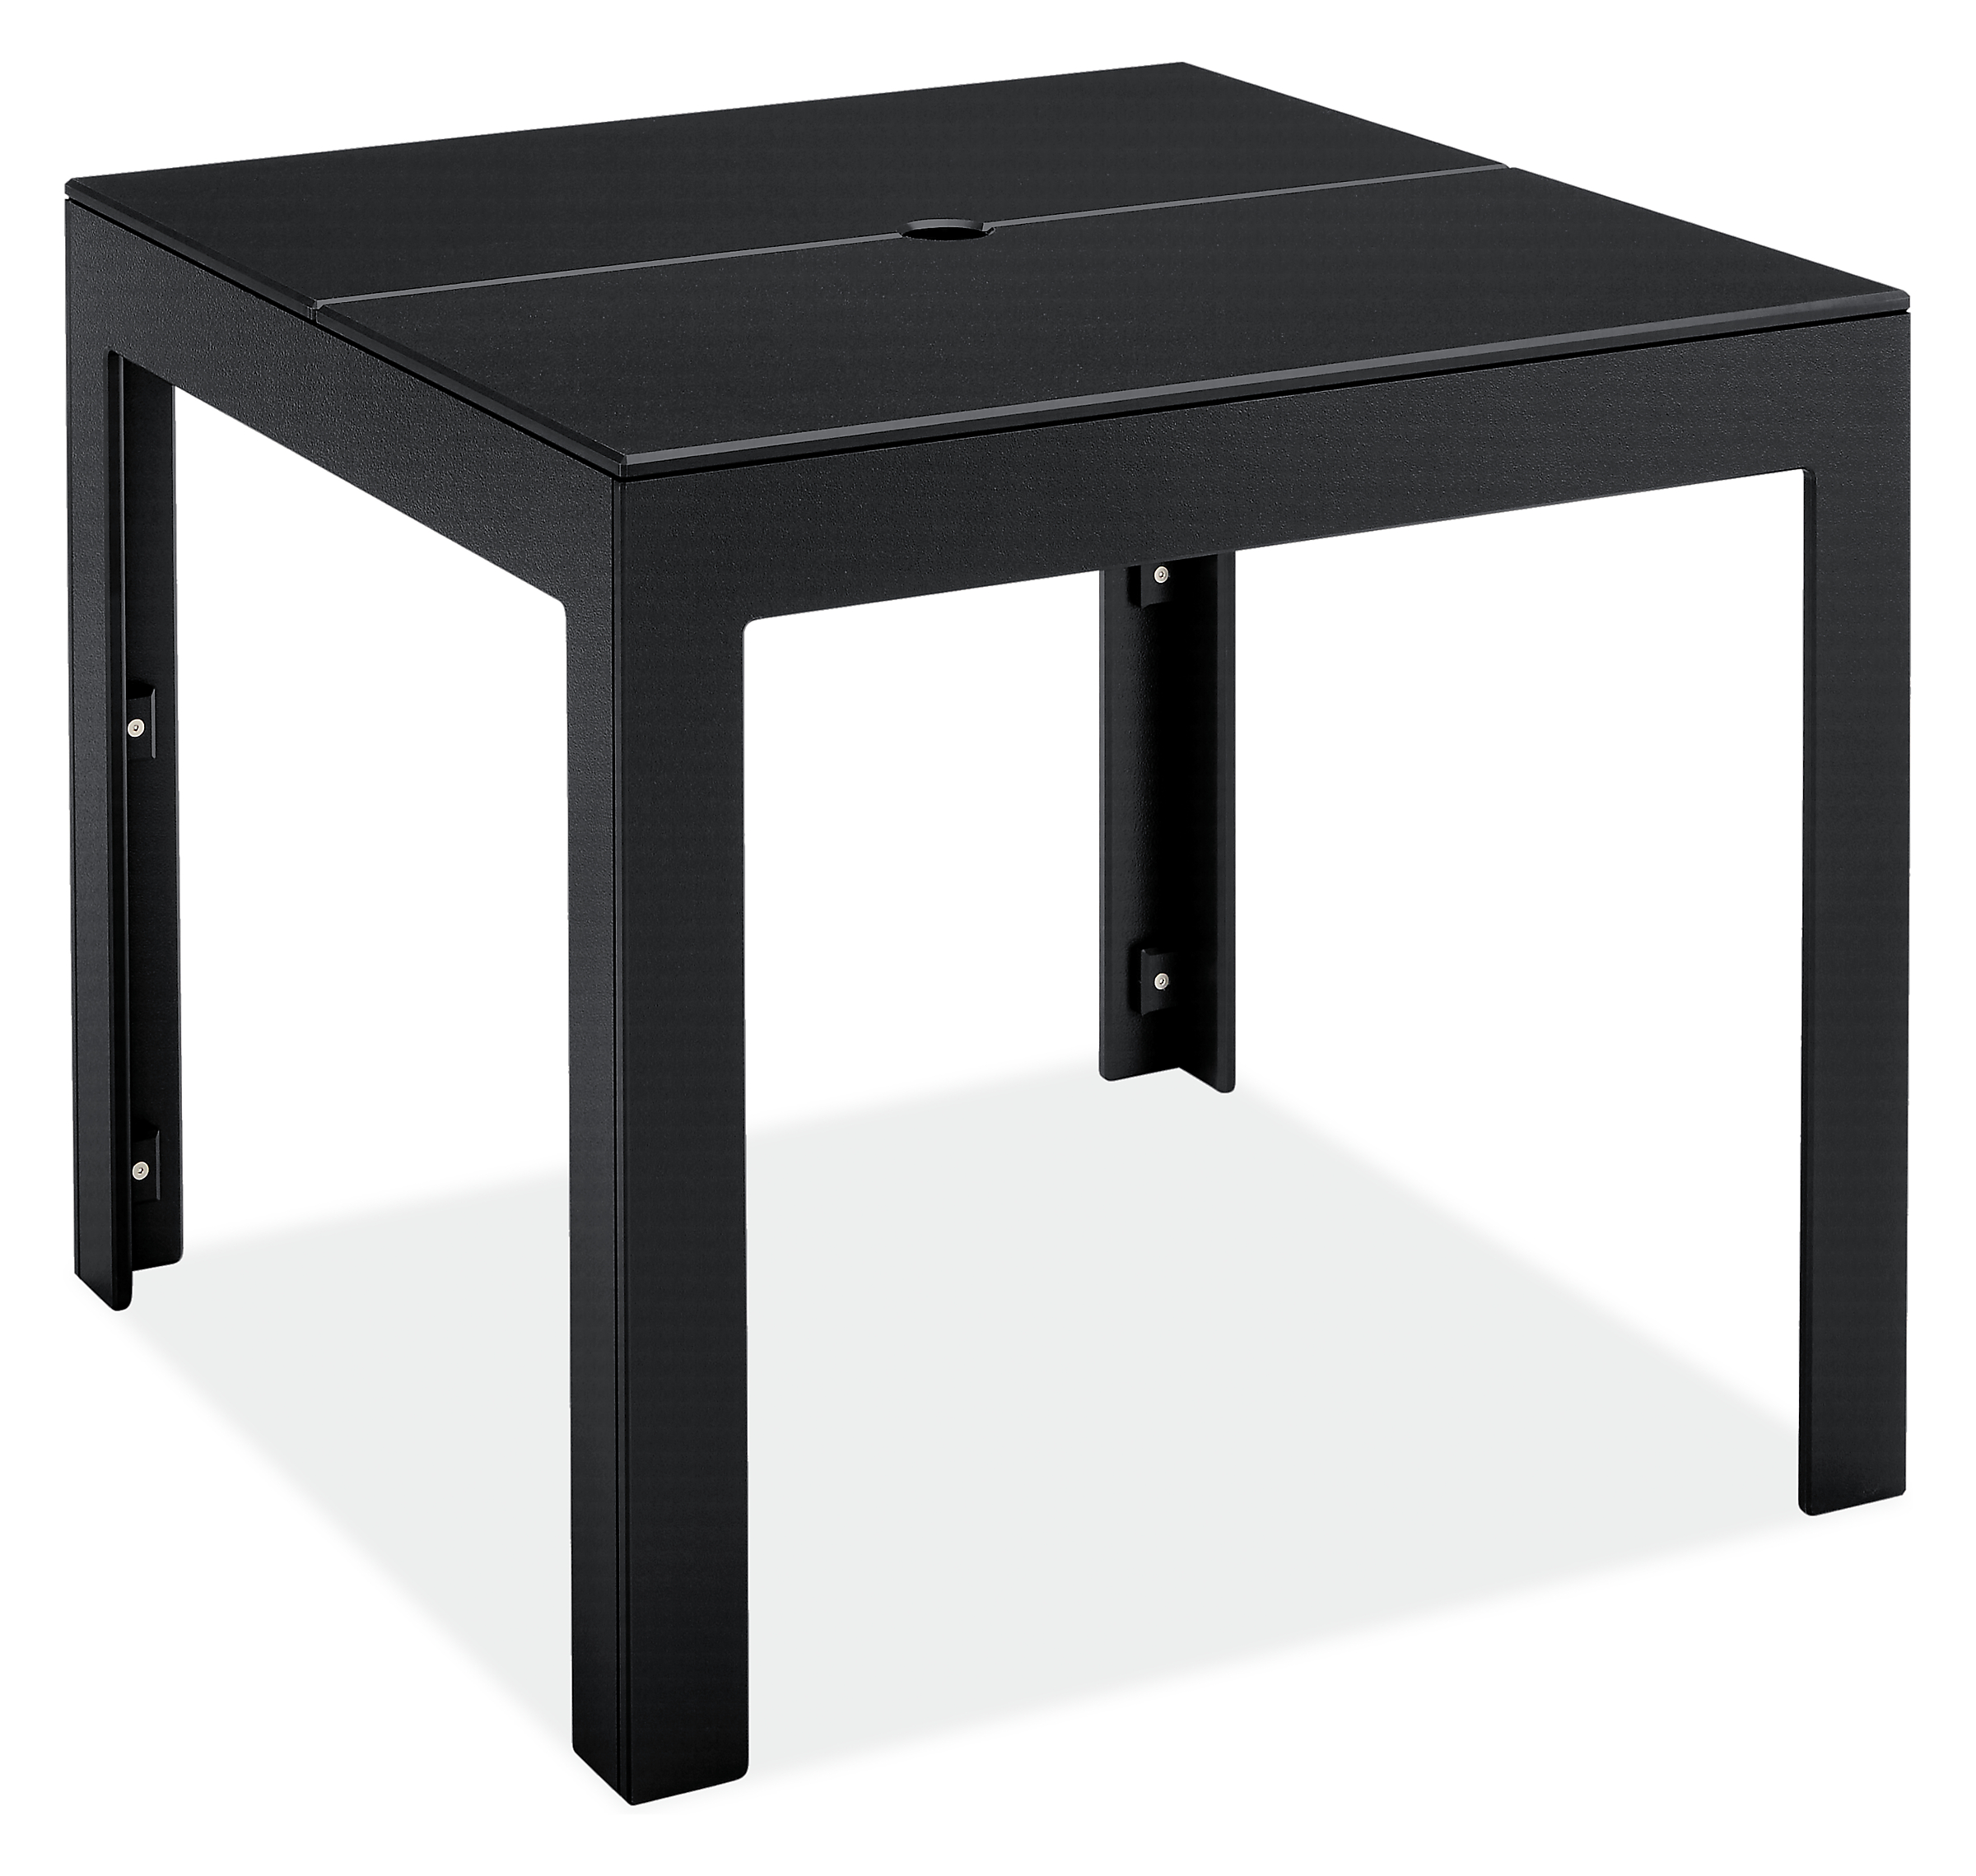 Henry 36w 36d 30h Table with Umbrella Hole